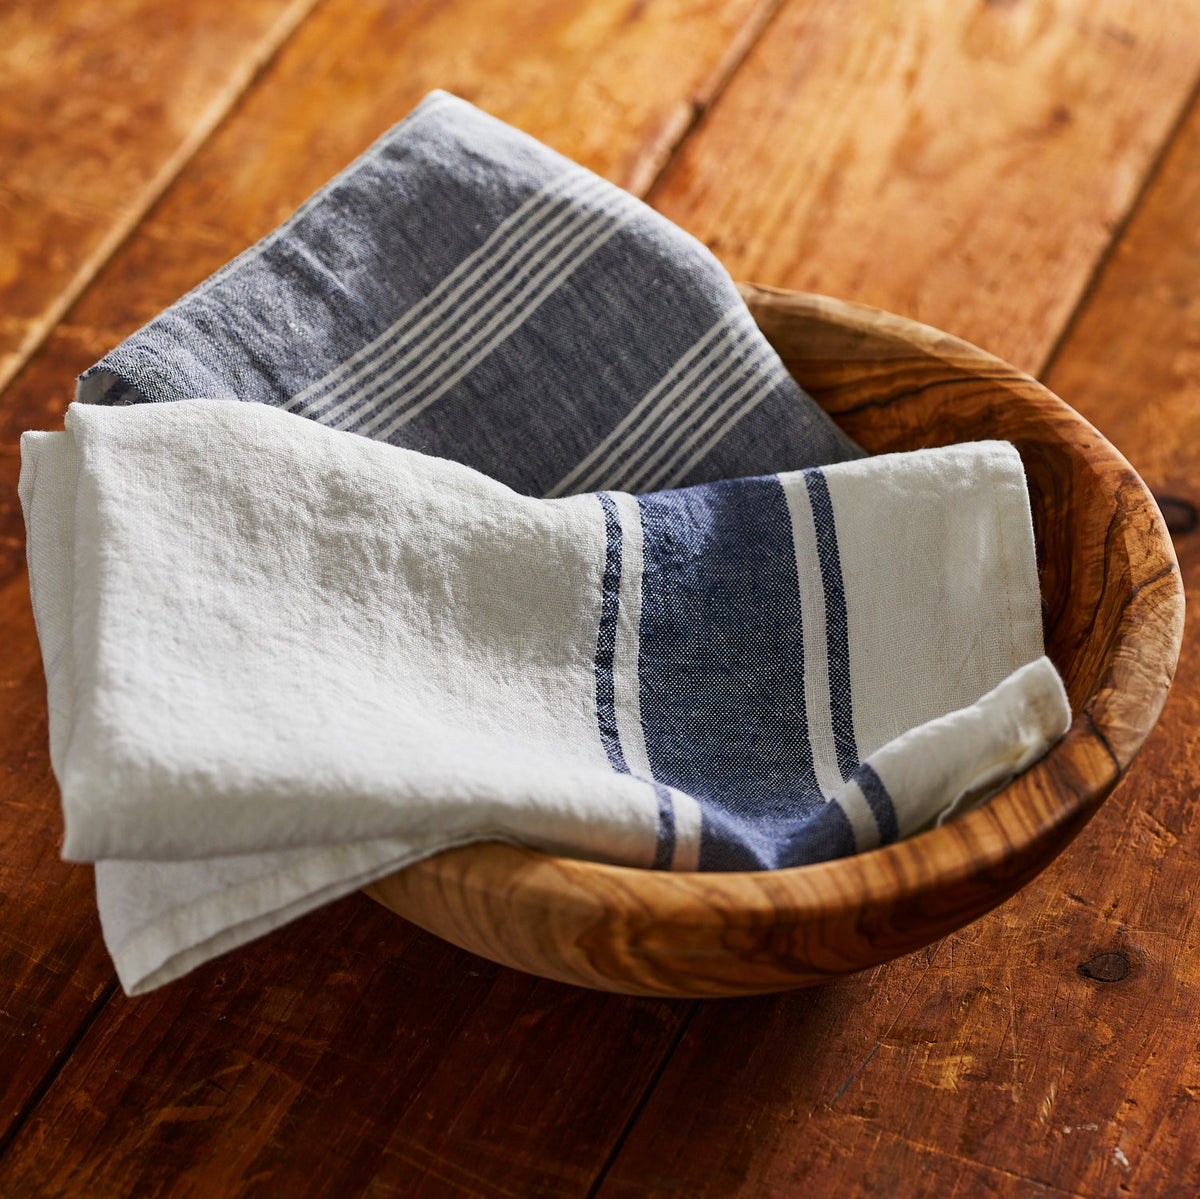 Two Trattoria Blue Linen Kitchen Towels Set/2 by TTT displayed in a wooden bowl.